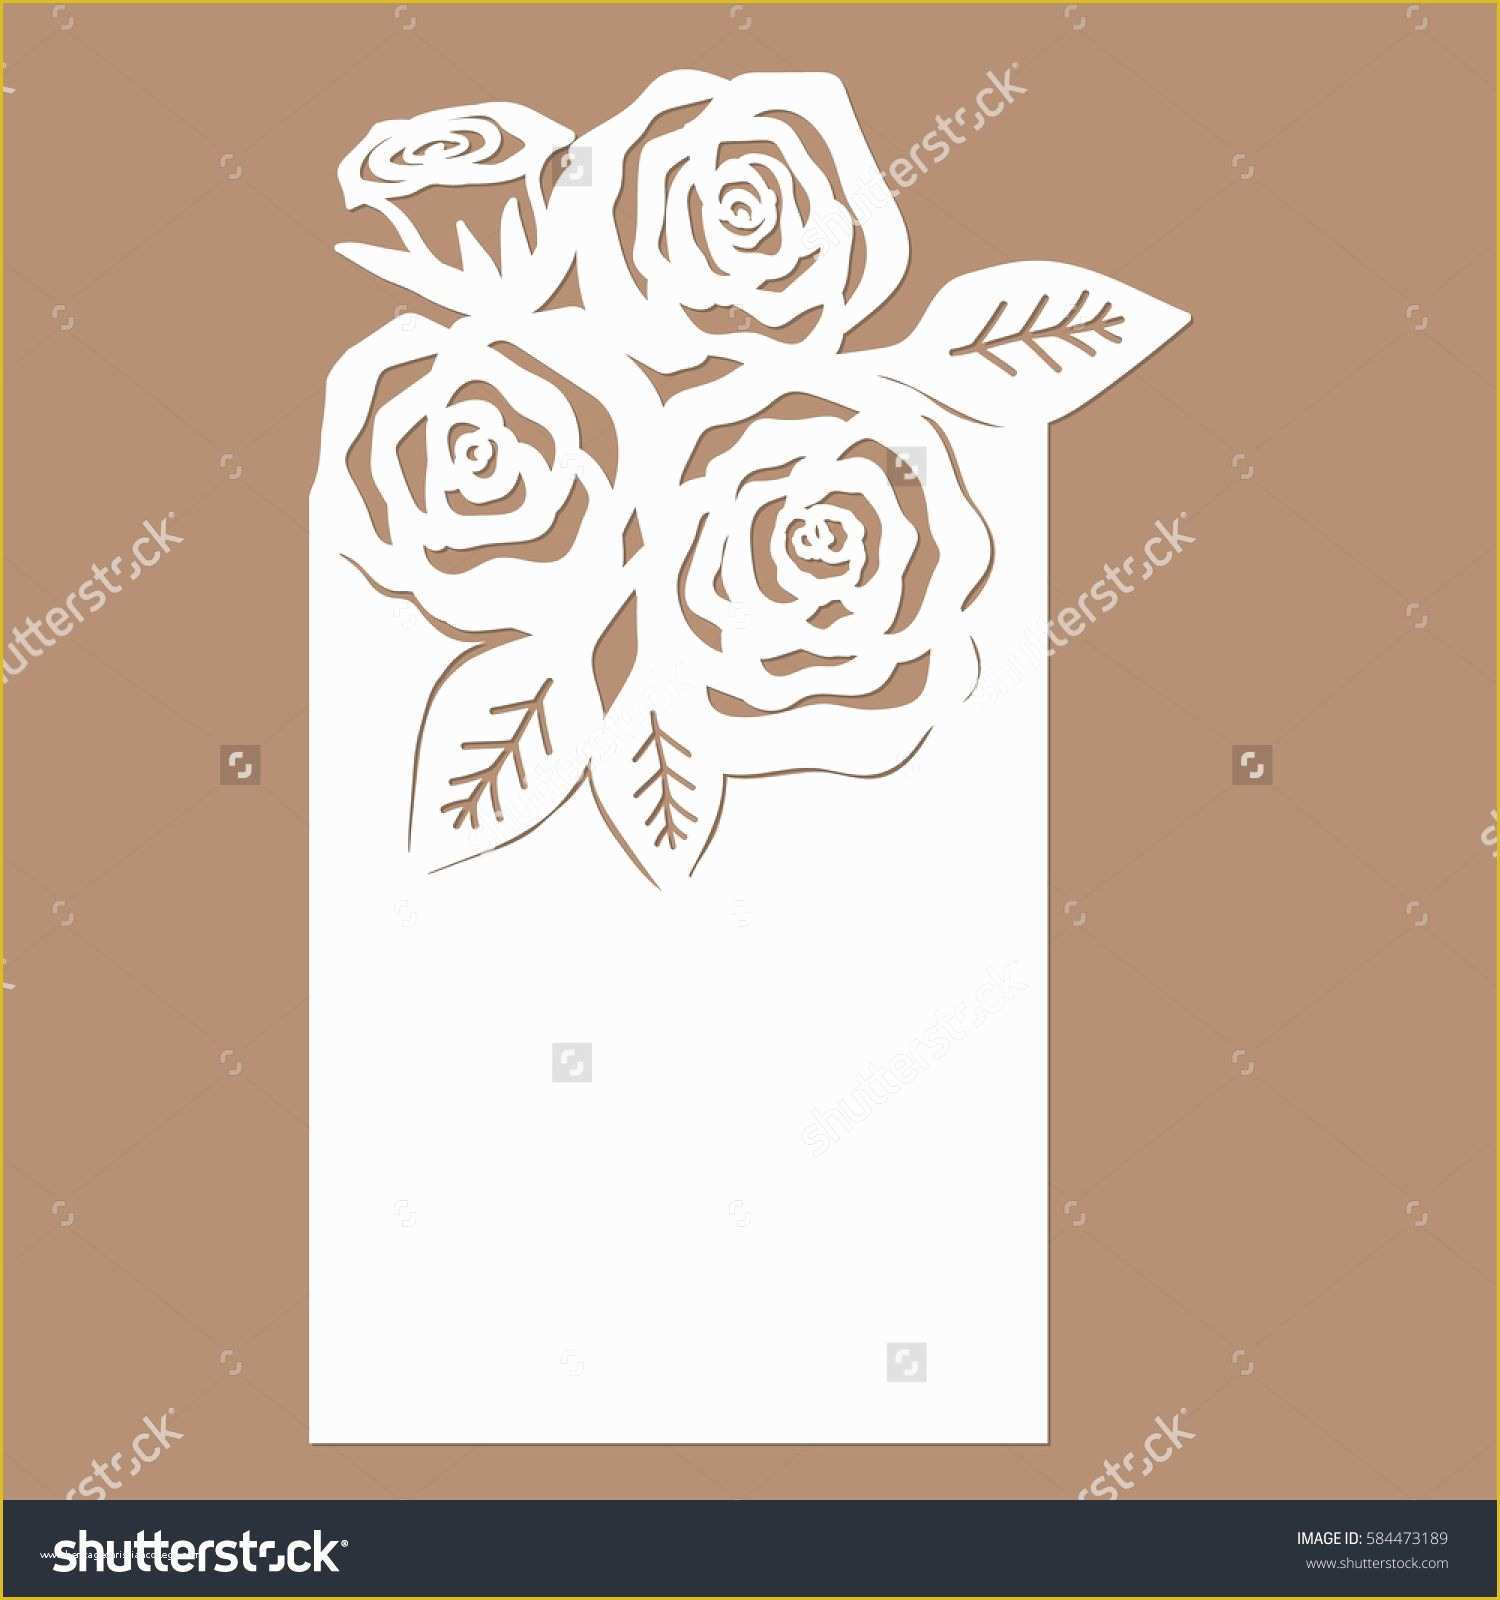 Free Laser Engraving Templates Of List for Letters with A Rose Template for Cutting Laser